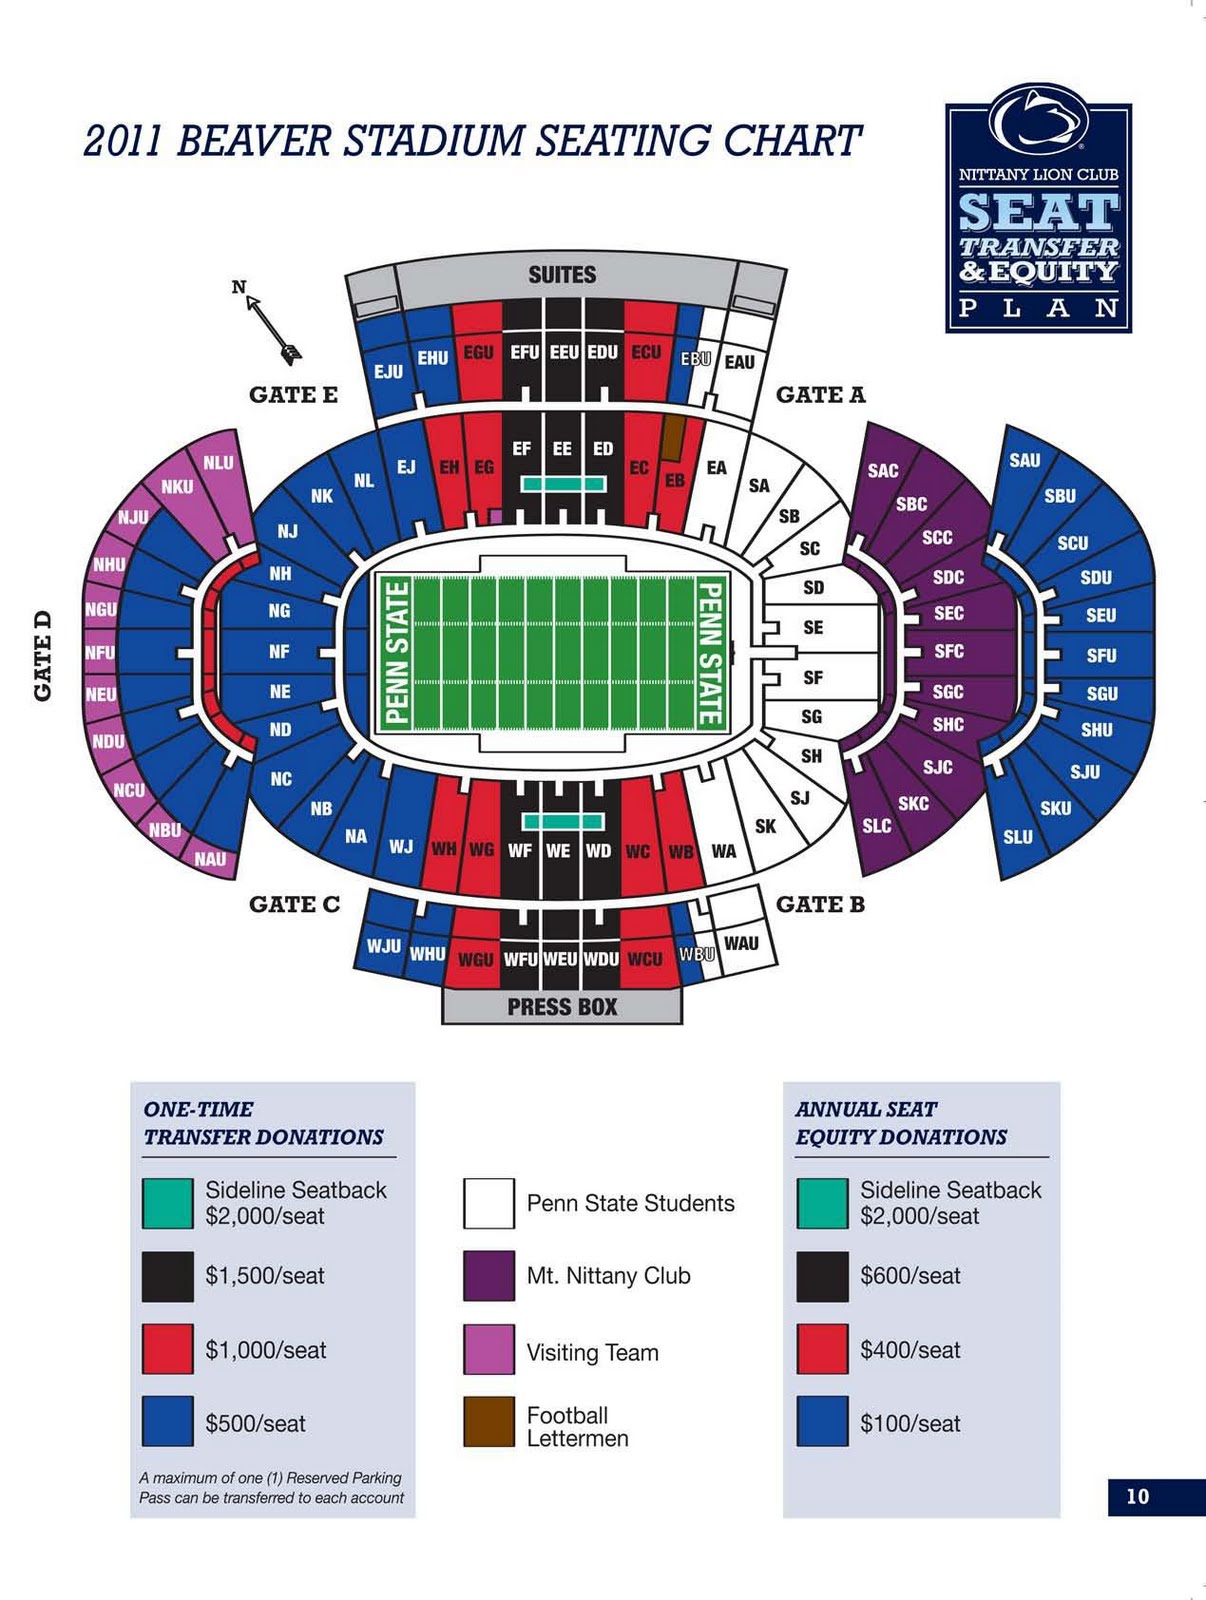 Beaver Stadium 2011 seating chart released. By Mike